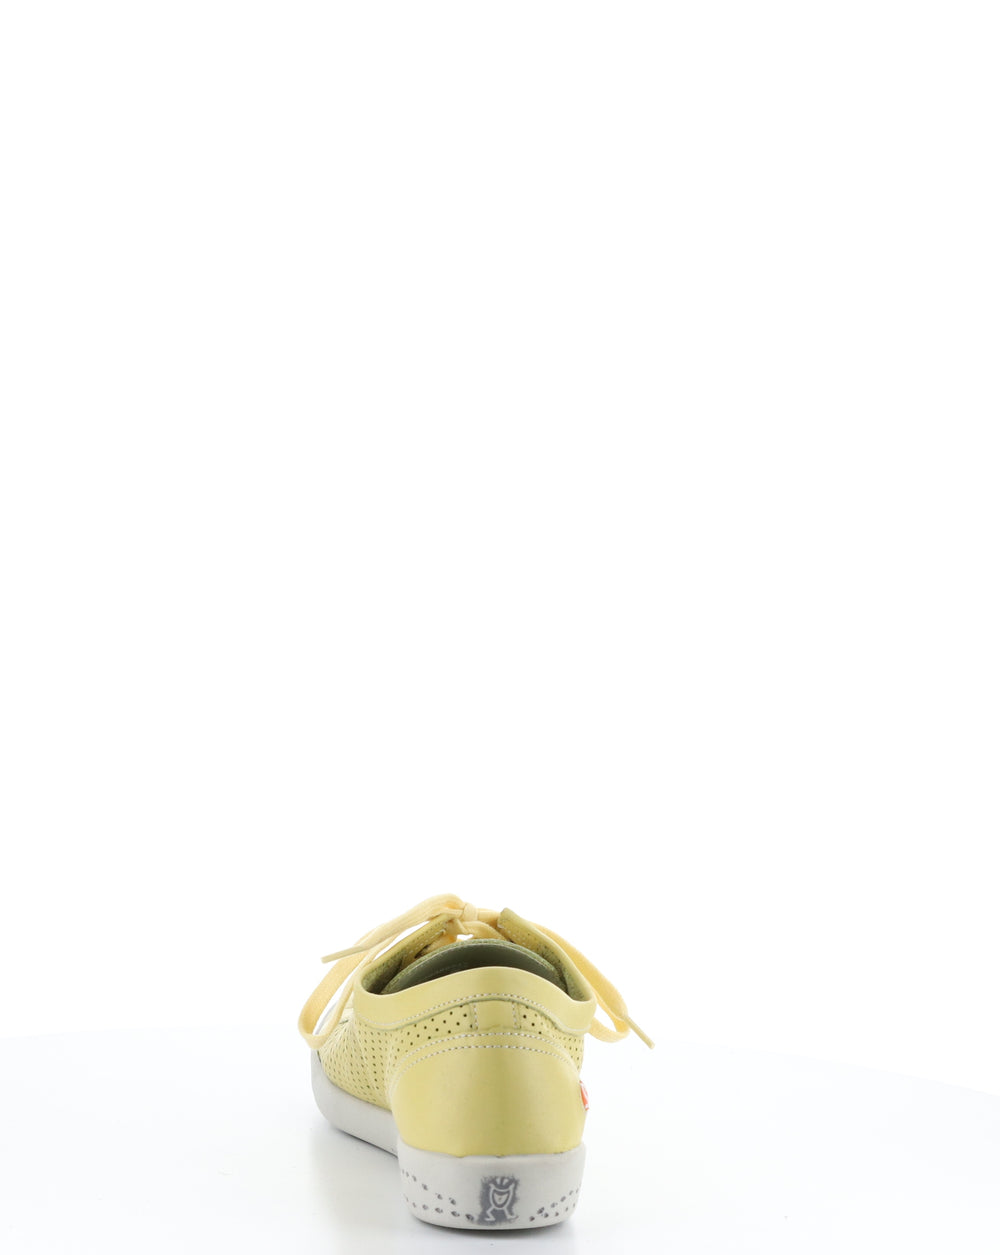 ICA388SOF 047 LT YELLOW Lace-up Shoes